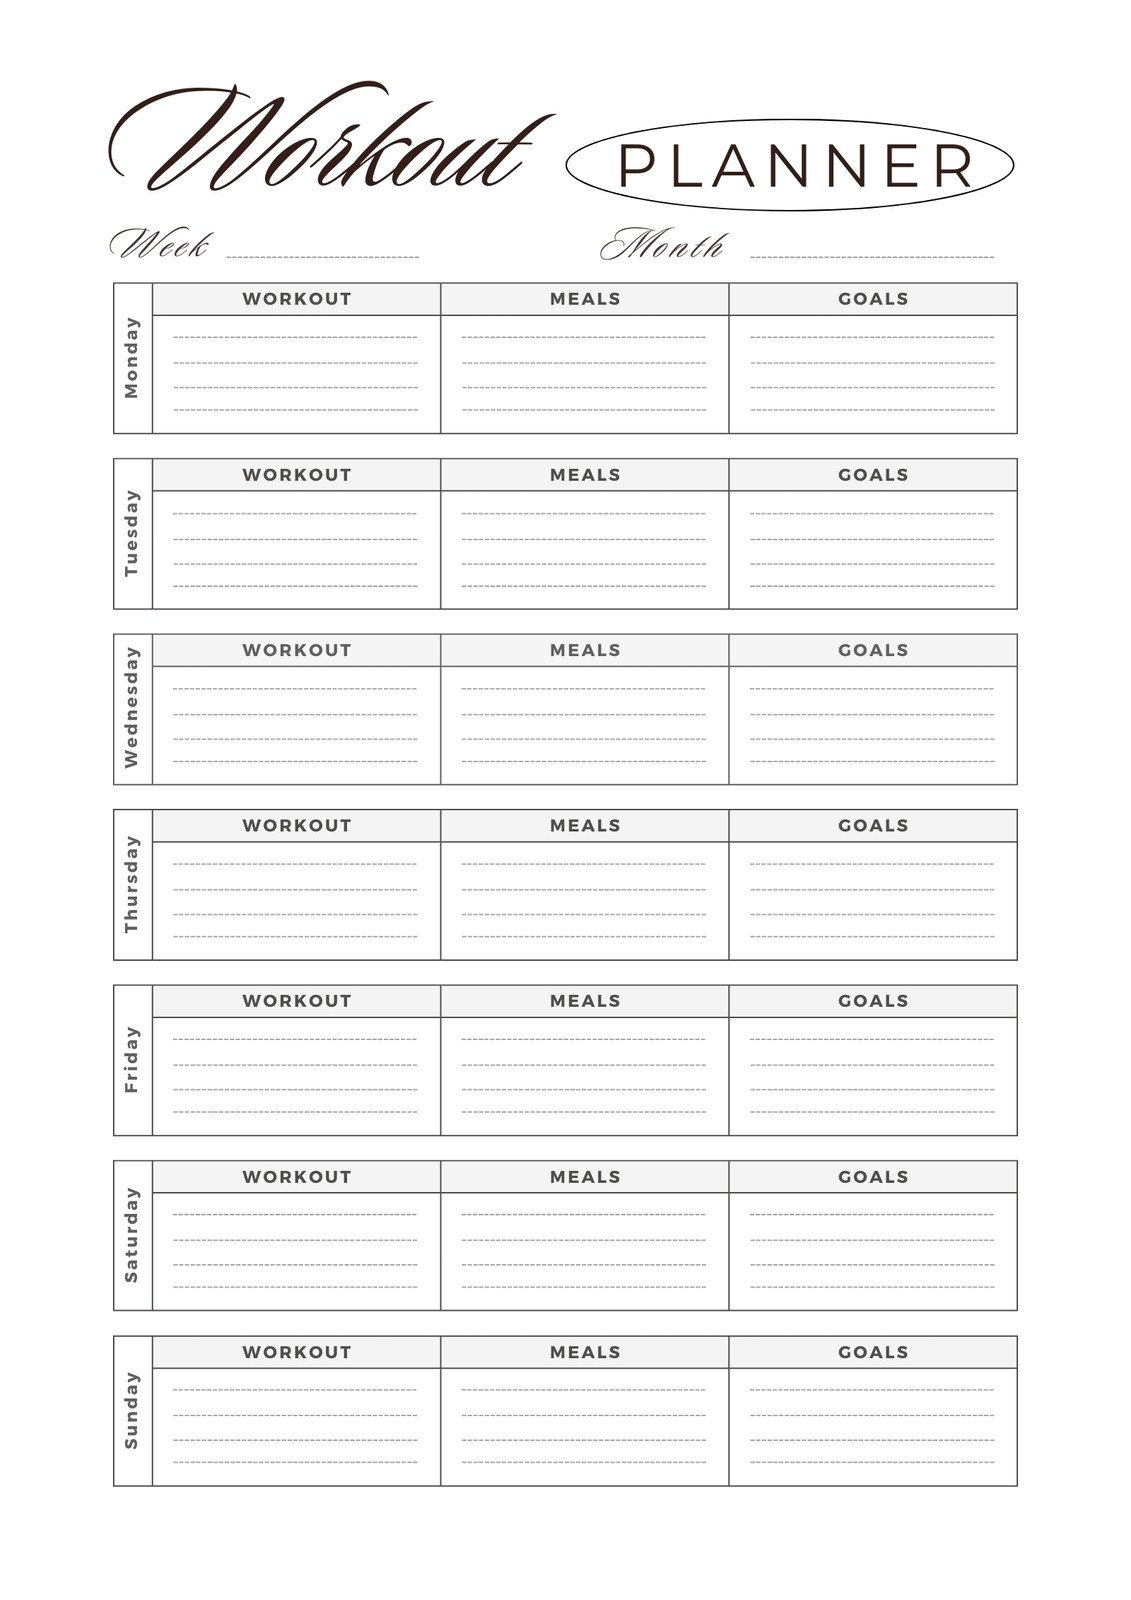 Updated my weekly planner template slightly, free download link in